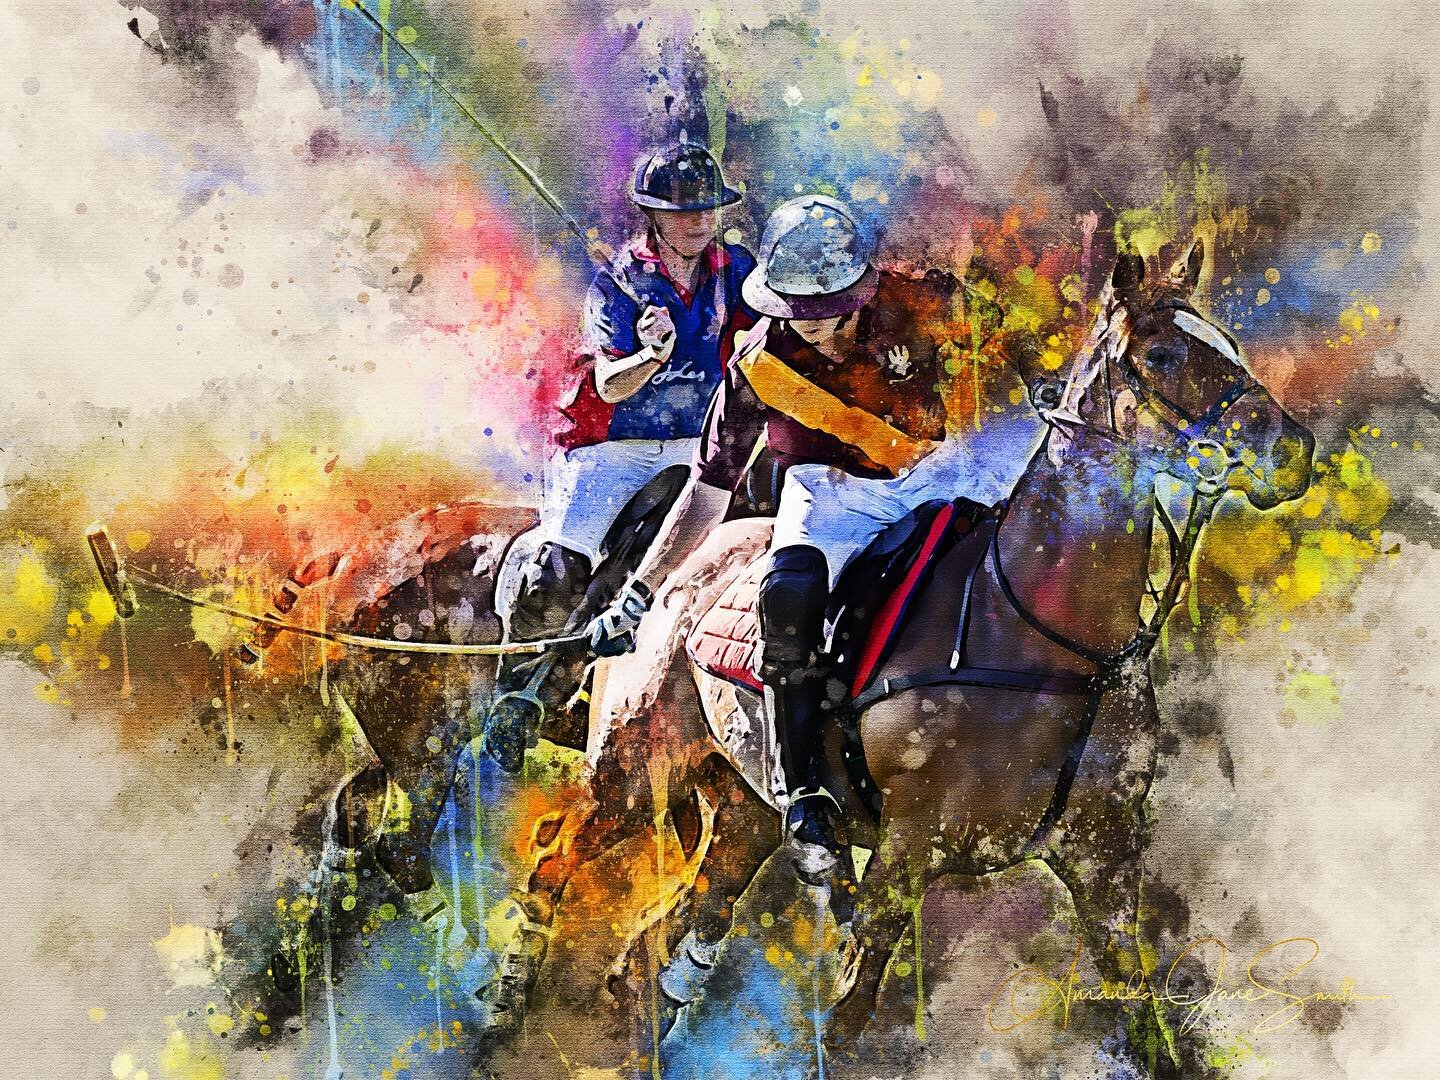 Another in the watercolour series.  This time featuring polo players from @kingsroyalhussars and @gunner_polo in at match at @tedworthparkpolo last summer. 

#krh #ra #gunners #polo #equineart